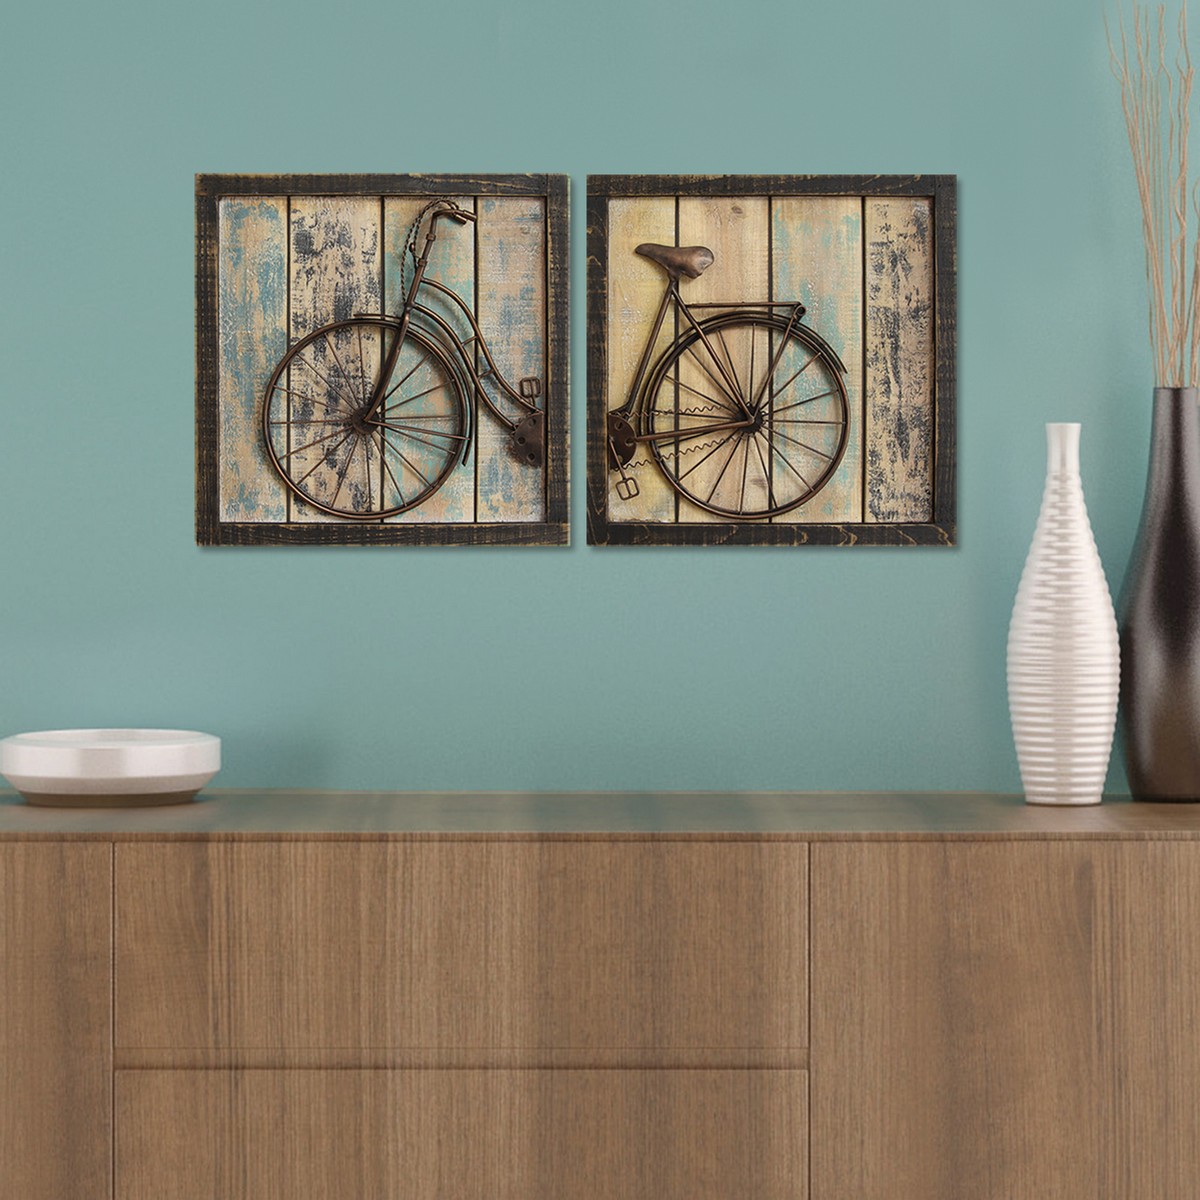 Stratton Home Decor Set of 2 Rustic Bicycle Wall Decor - Multi